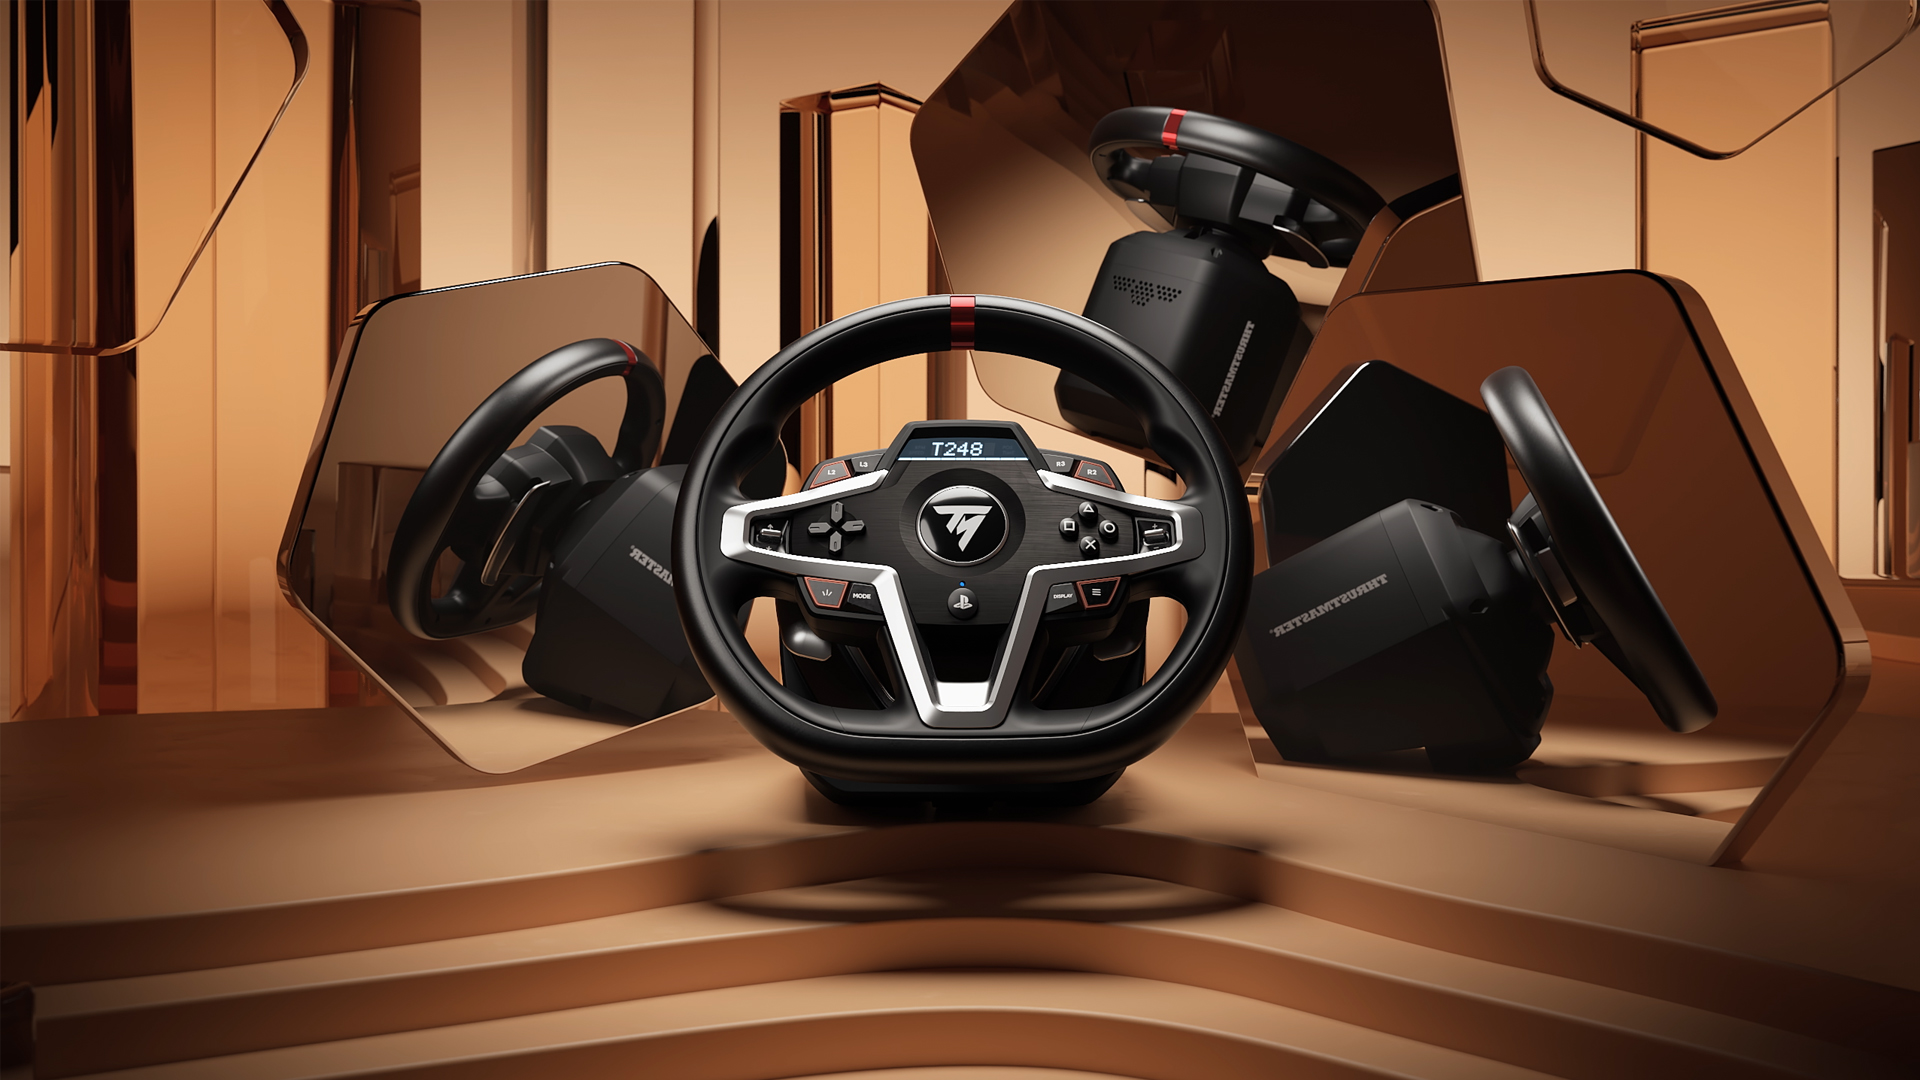 Master each track with the Thrustmaster T248 Racing Wheel - Ban